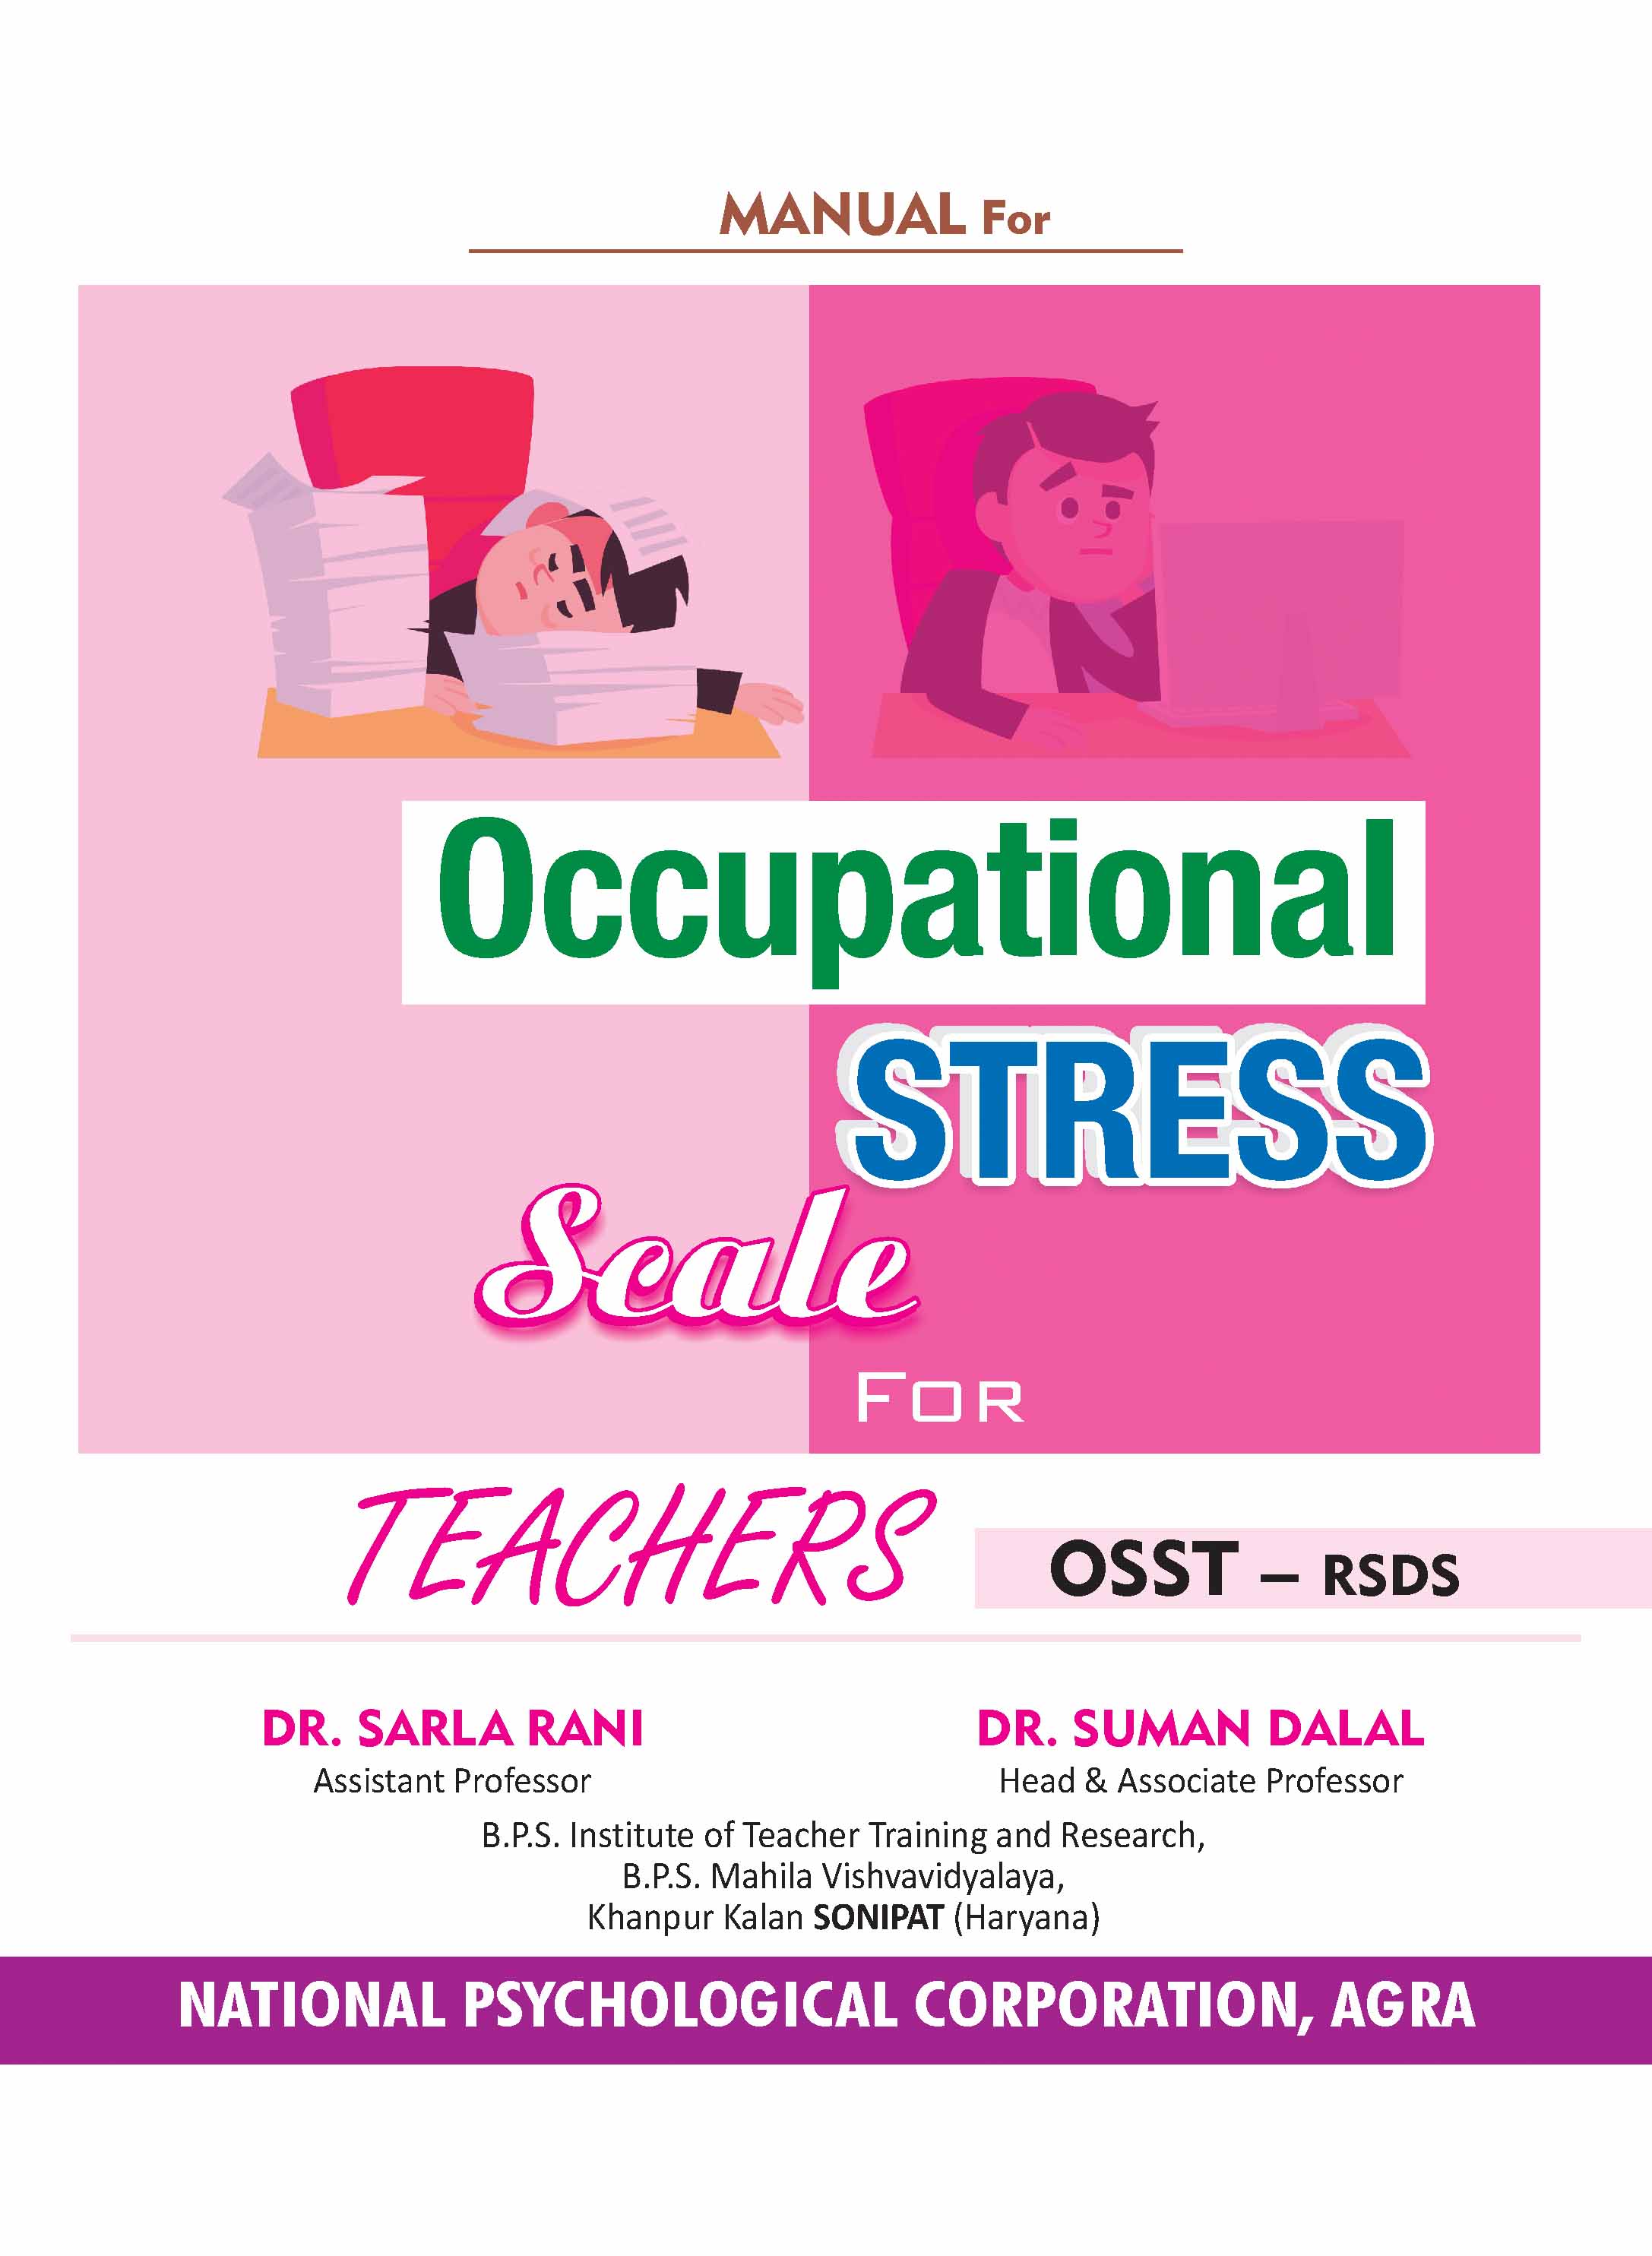 OCCUPATIONAL-STRESS-SCALE-FOR-TEACHERS